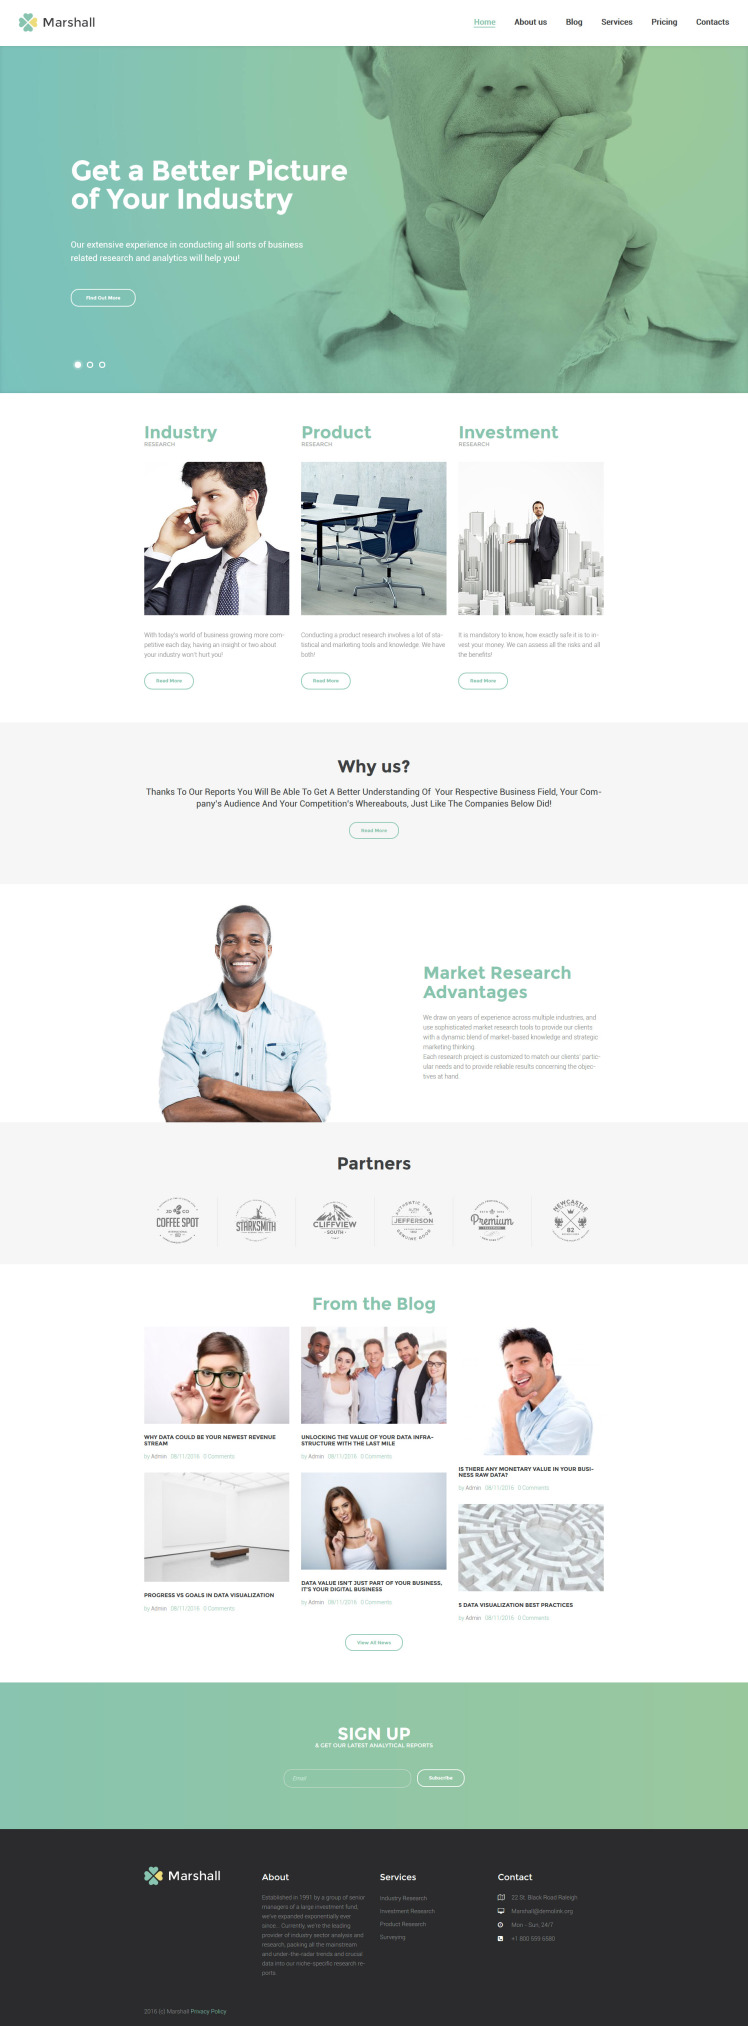 Marshall Business Analysis and Market Research Agency WordPress Theme